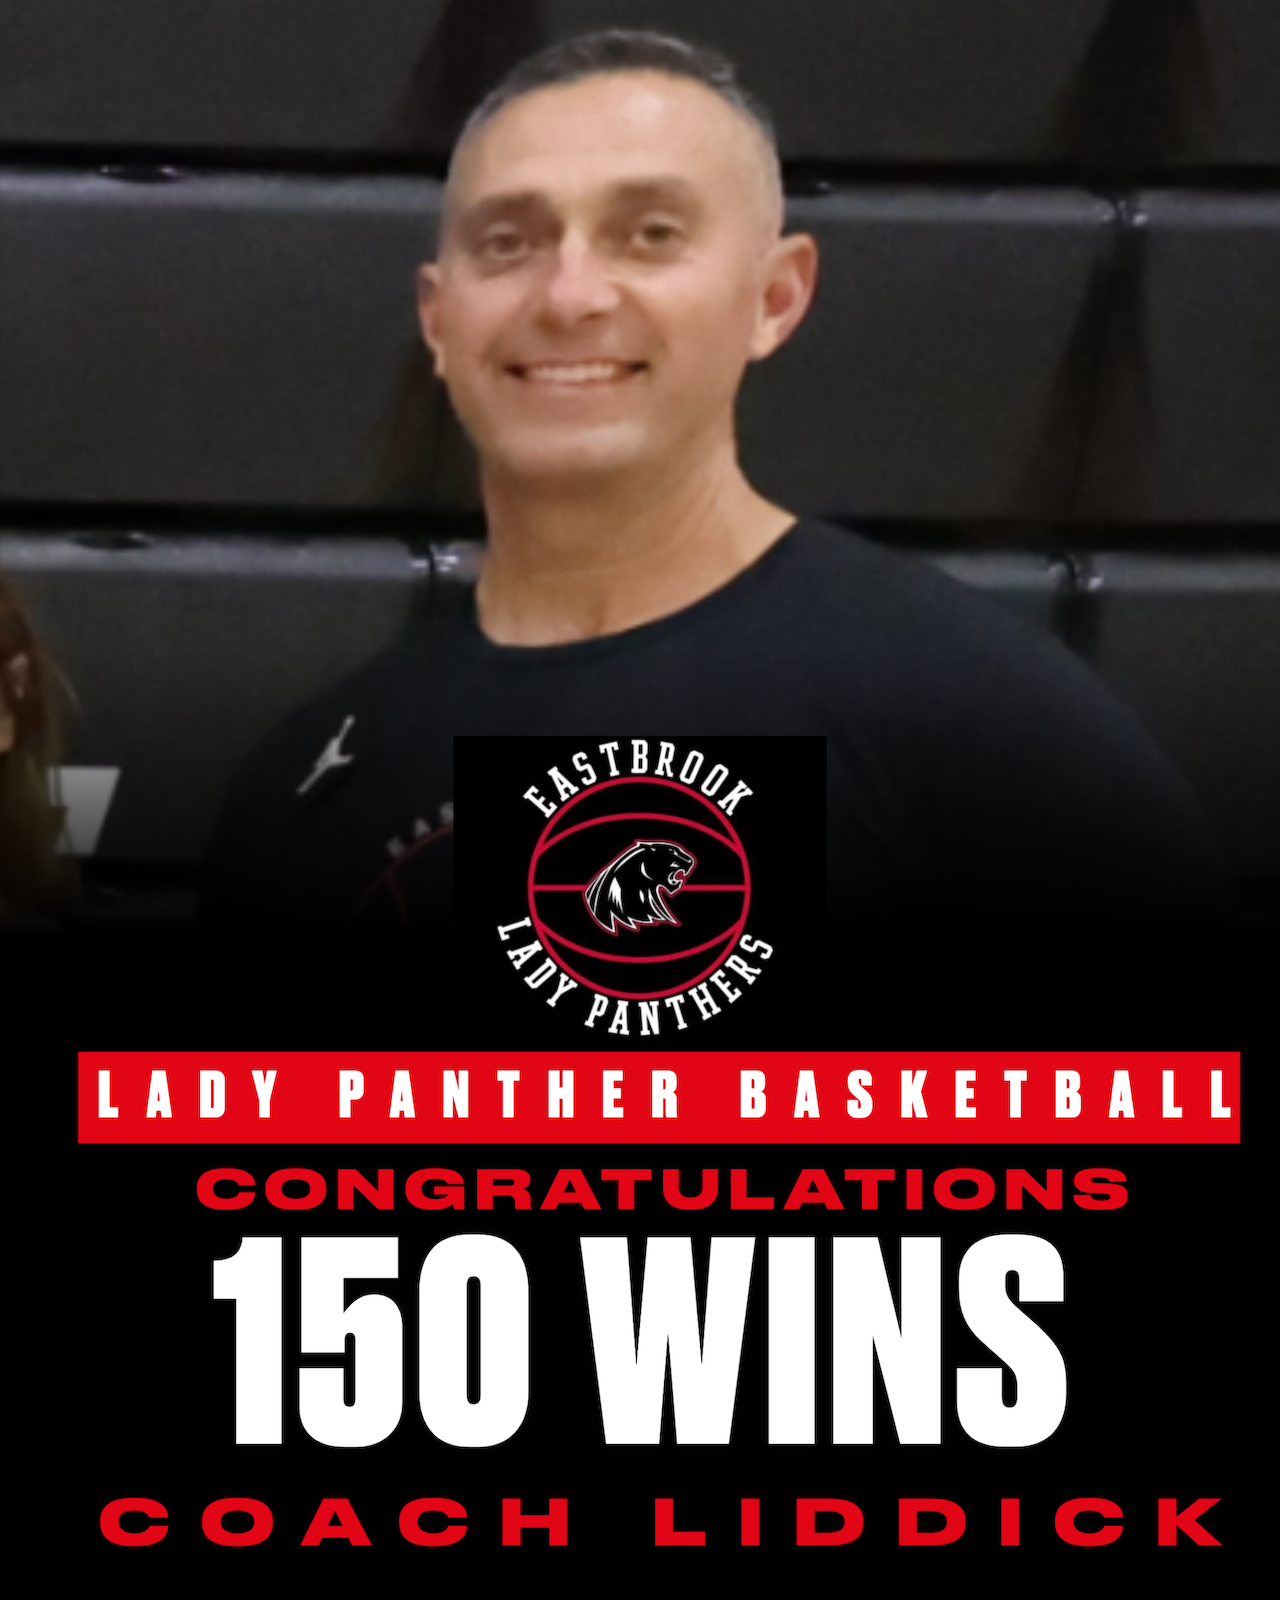 Coach Liddick wins his 150th game cover photo